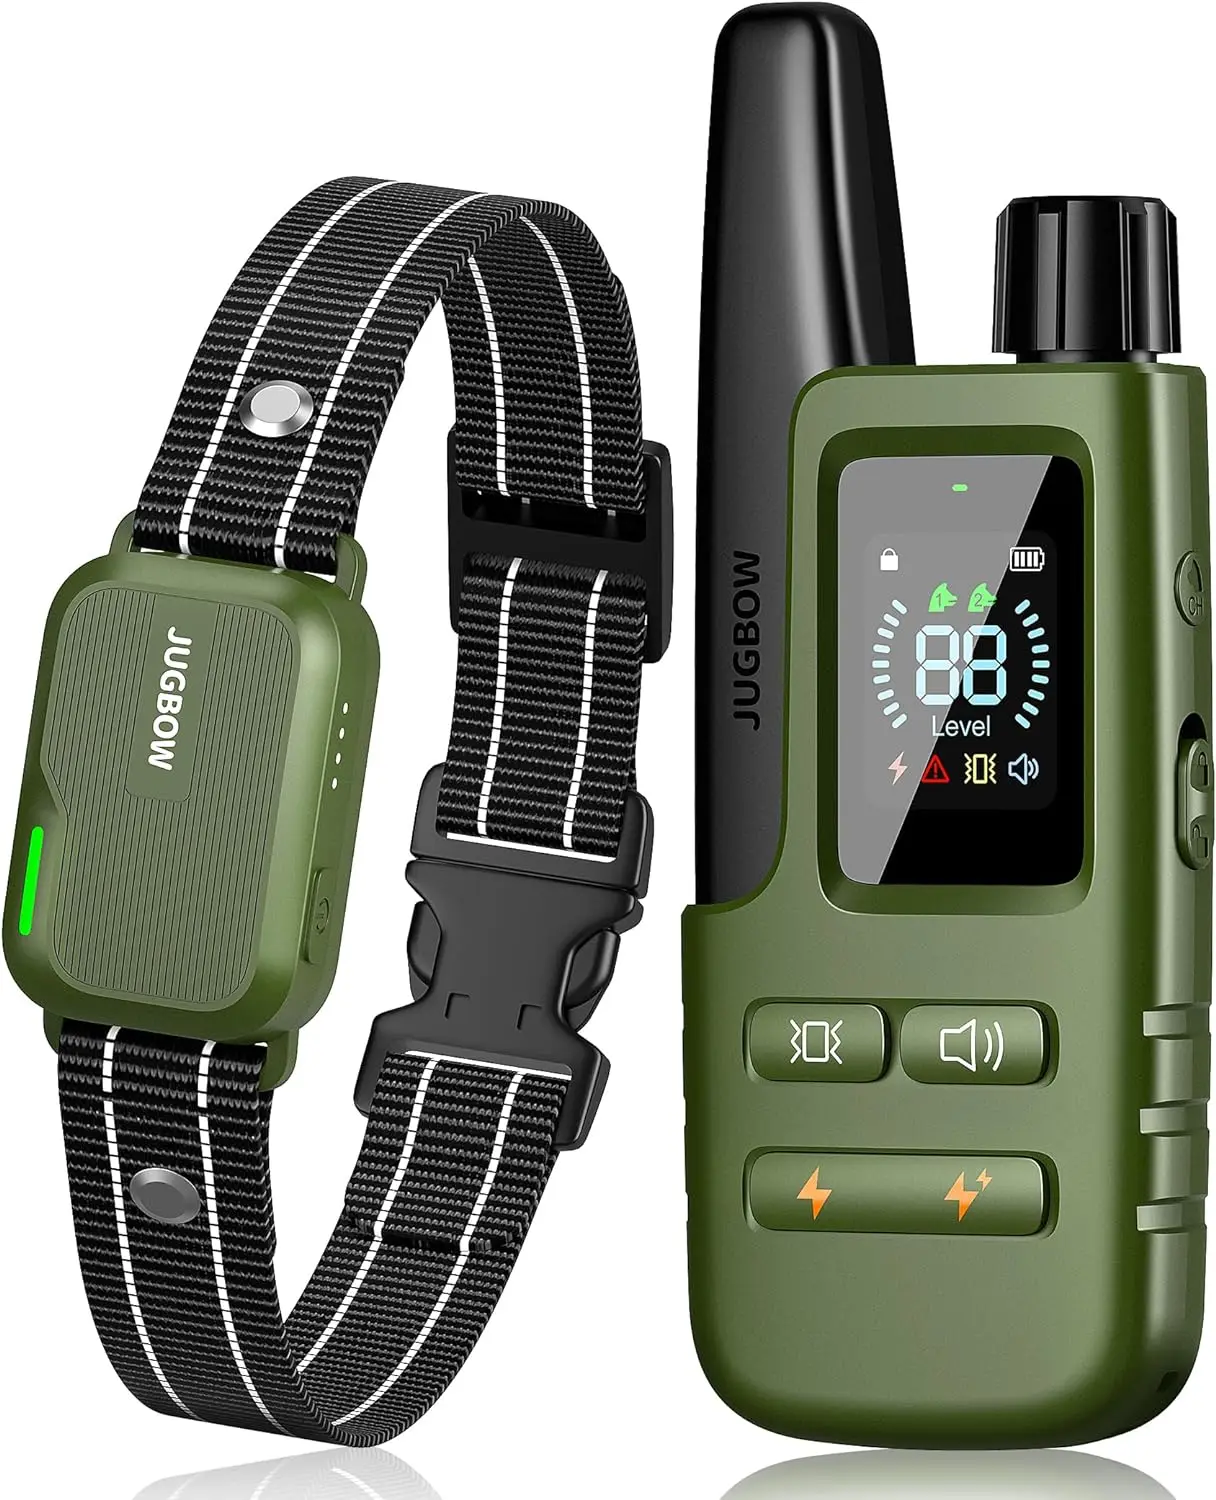 

Dog Shock Collar - 3300FT Dog Training Collar with Remote Innovative IPX7 Waterproof with 4 Modes, Rechargeable E-Colla